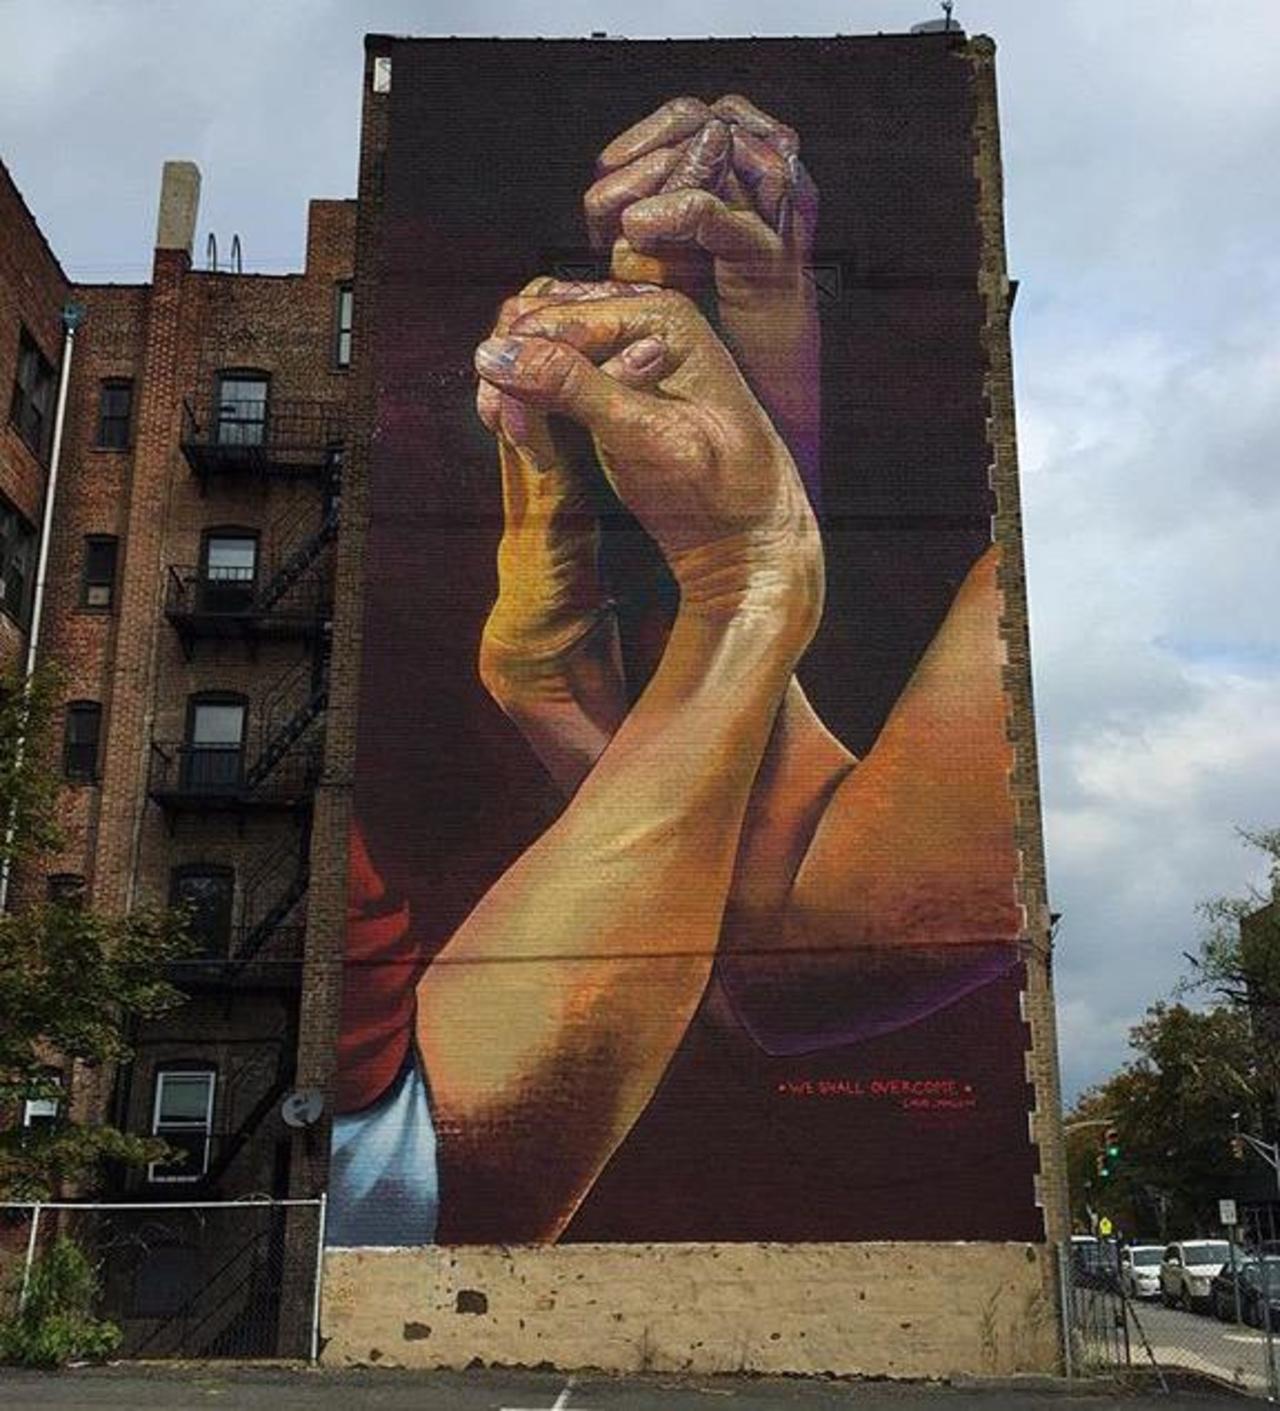 New Street Art by CaseMaclaim in Jersey City for the TheBKcollective 

#art #graffiti #mural #streetart http://t.co/HAfU7bPMs1